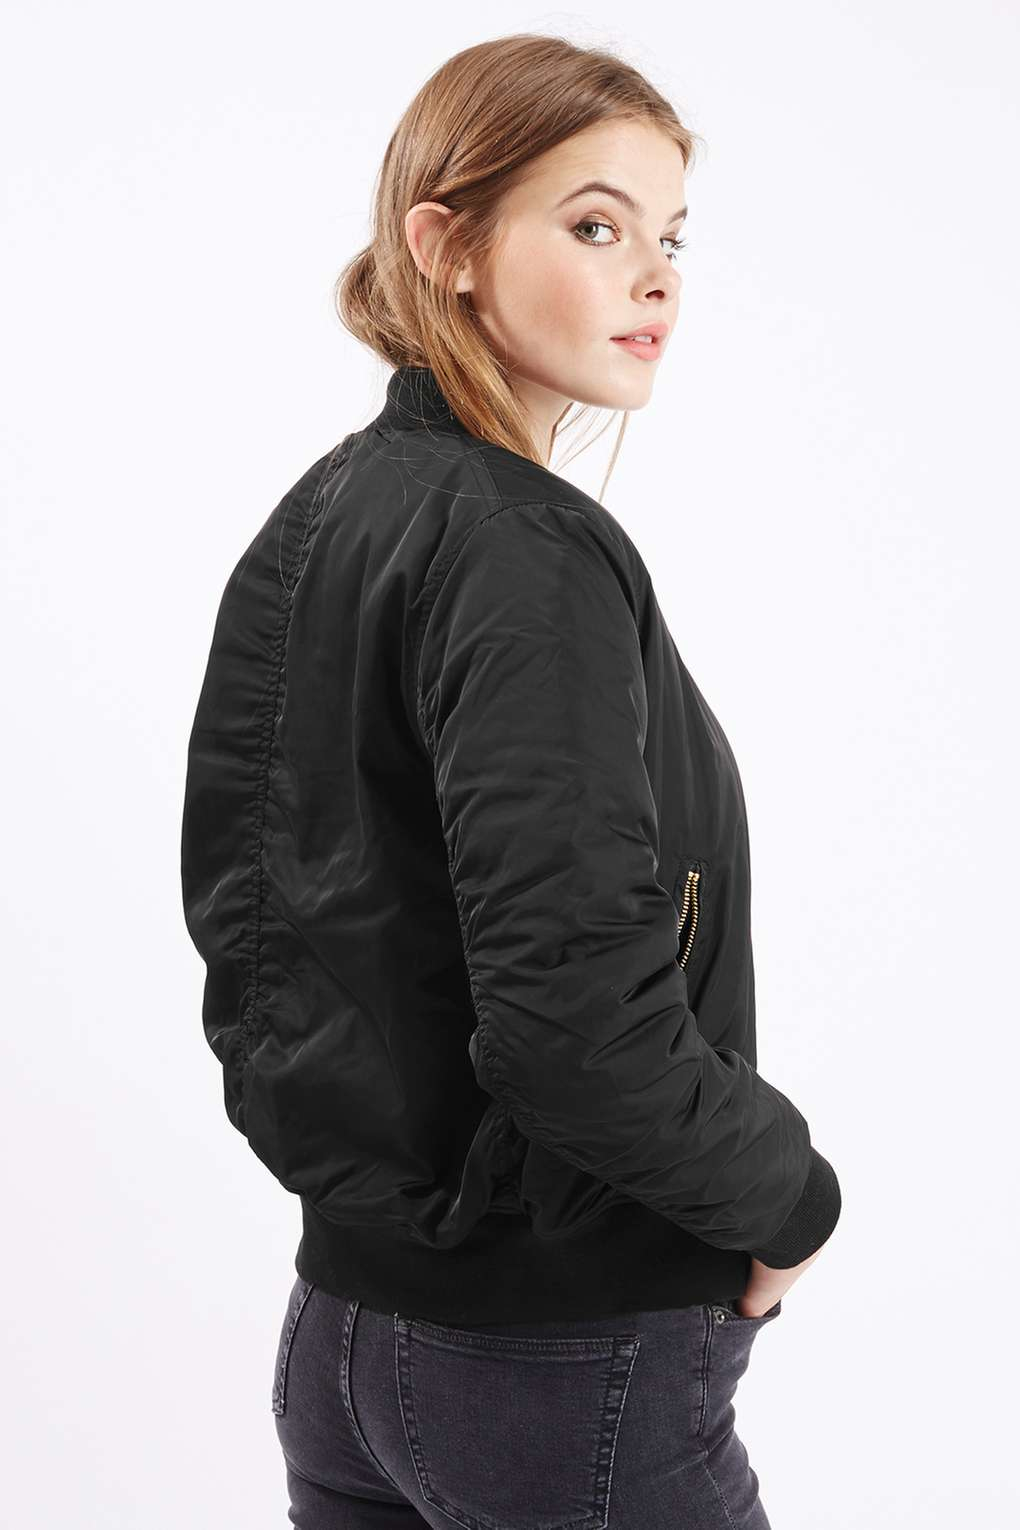 Lyst - Topshop Petite Ma1 Bomber Jacket in Black